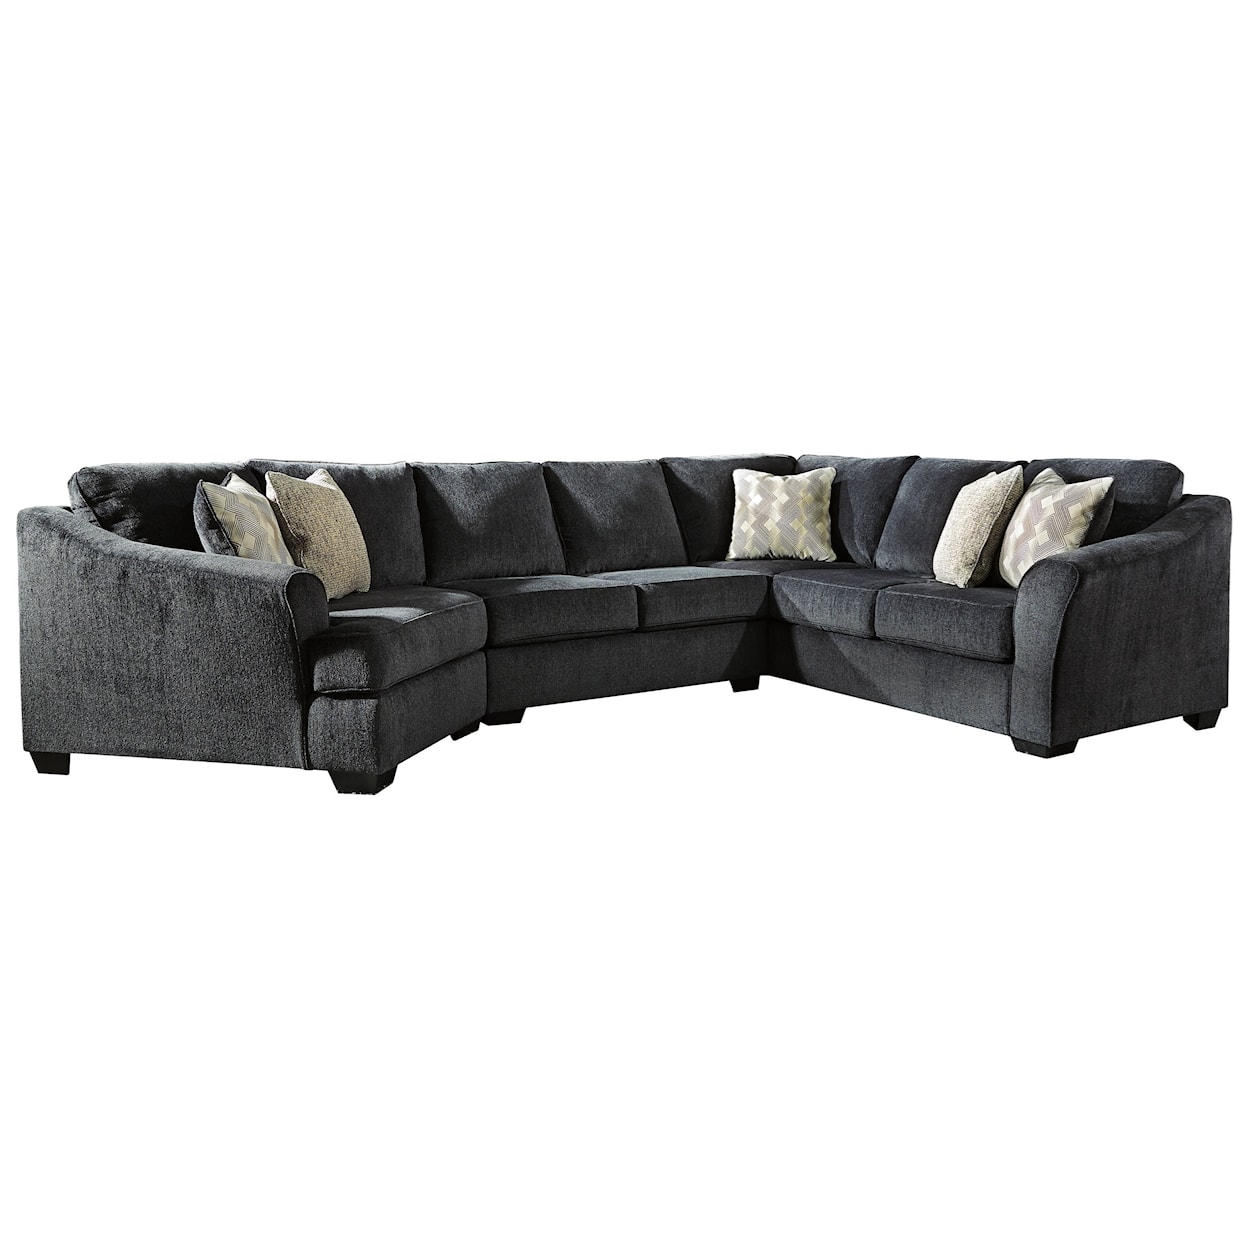 Signature Design by Ashley Eltmann 3-Piece Sectional with Left Cuddler